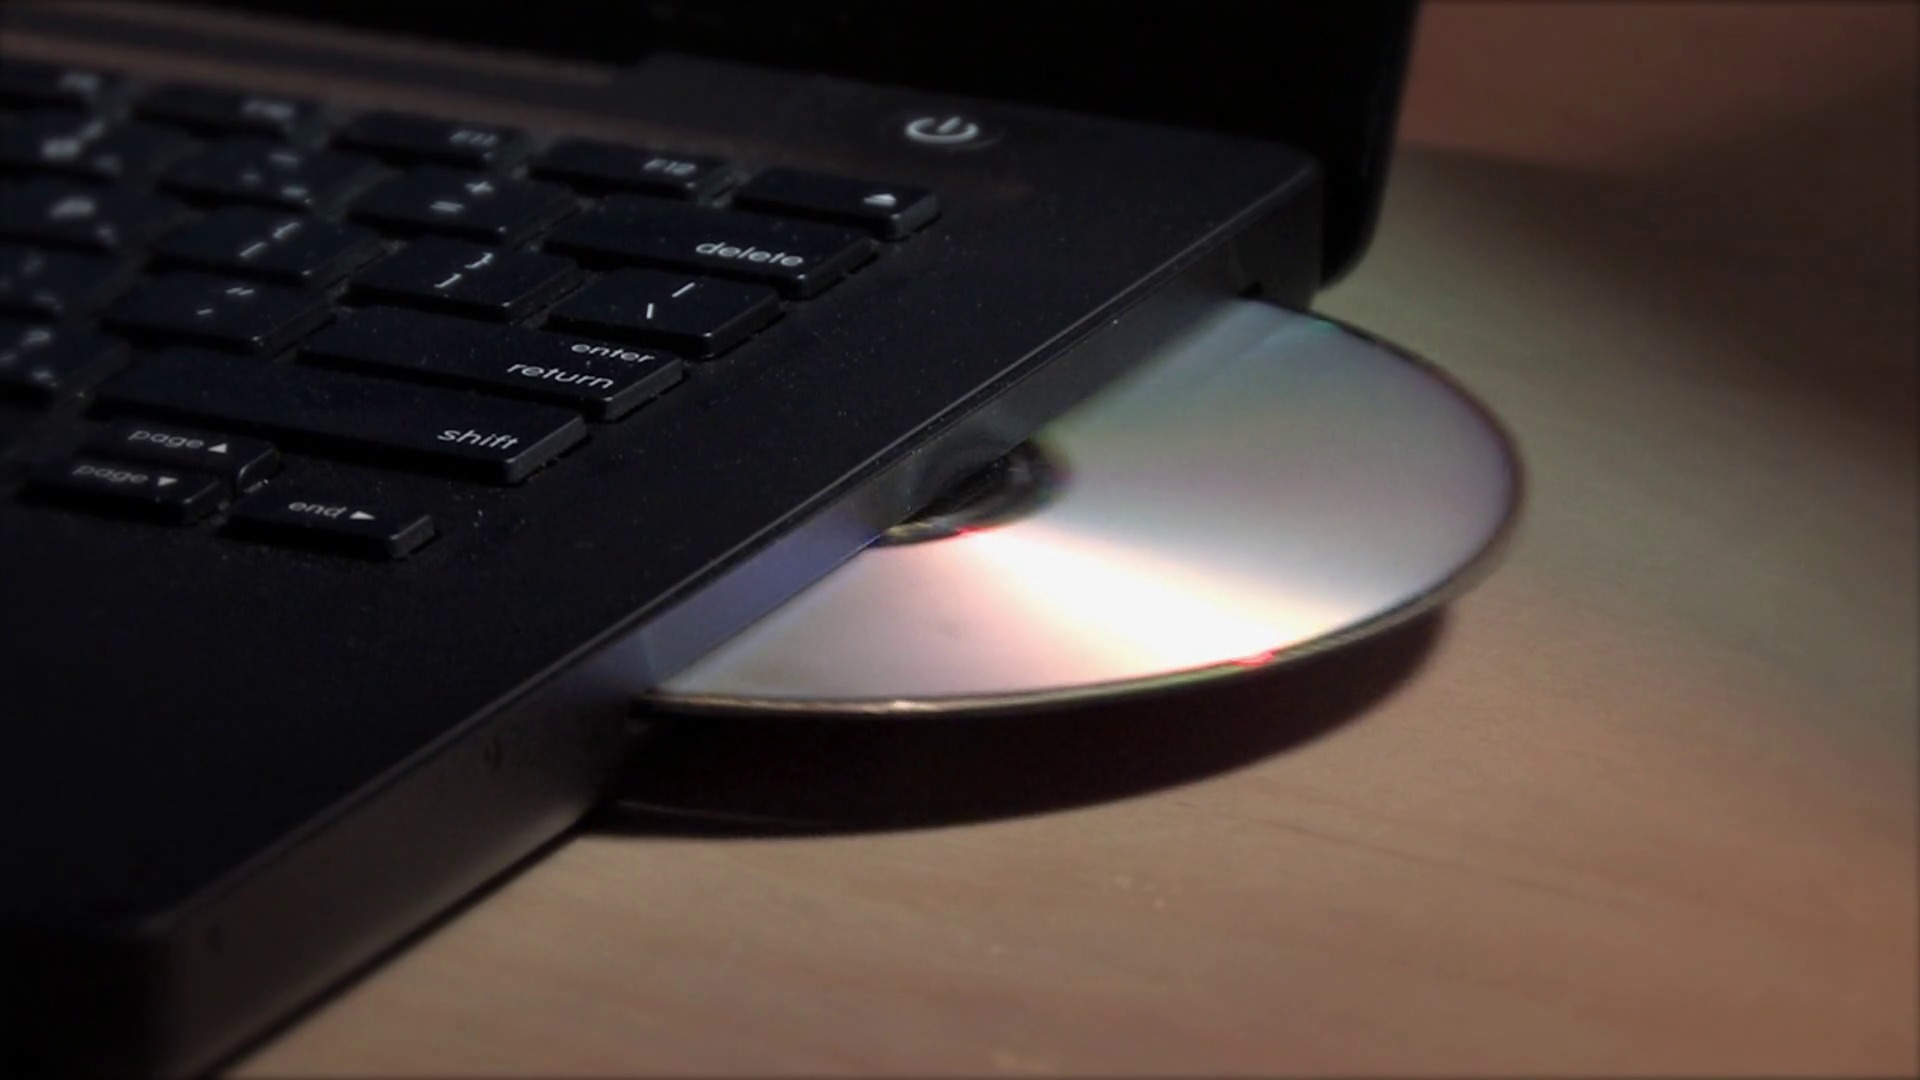 How To Open A Stuck DVD Tray